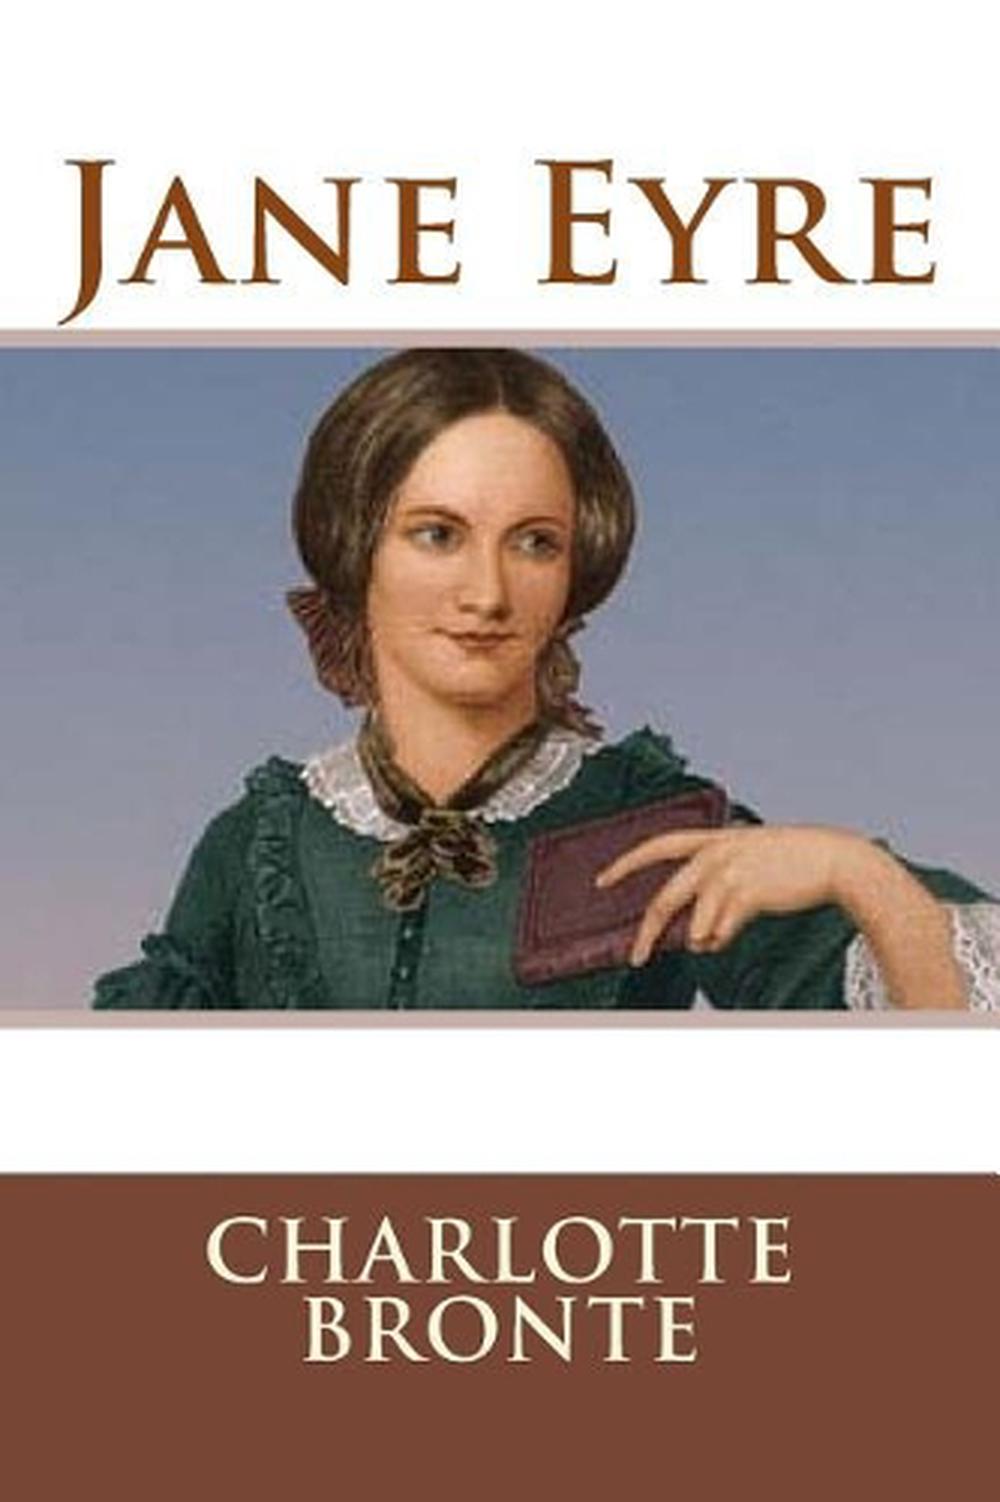 book review jane eyre